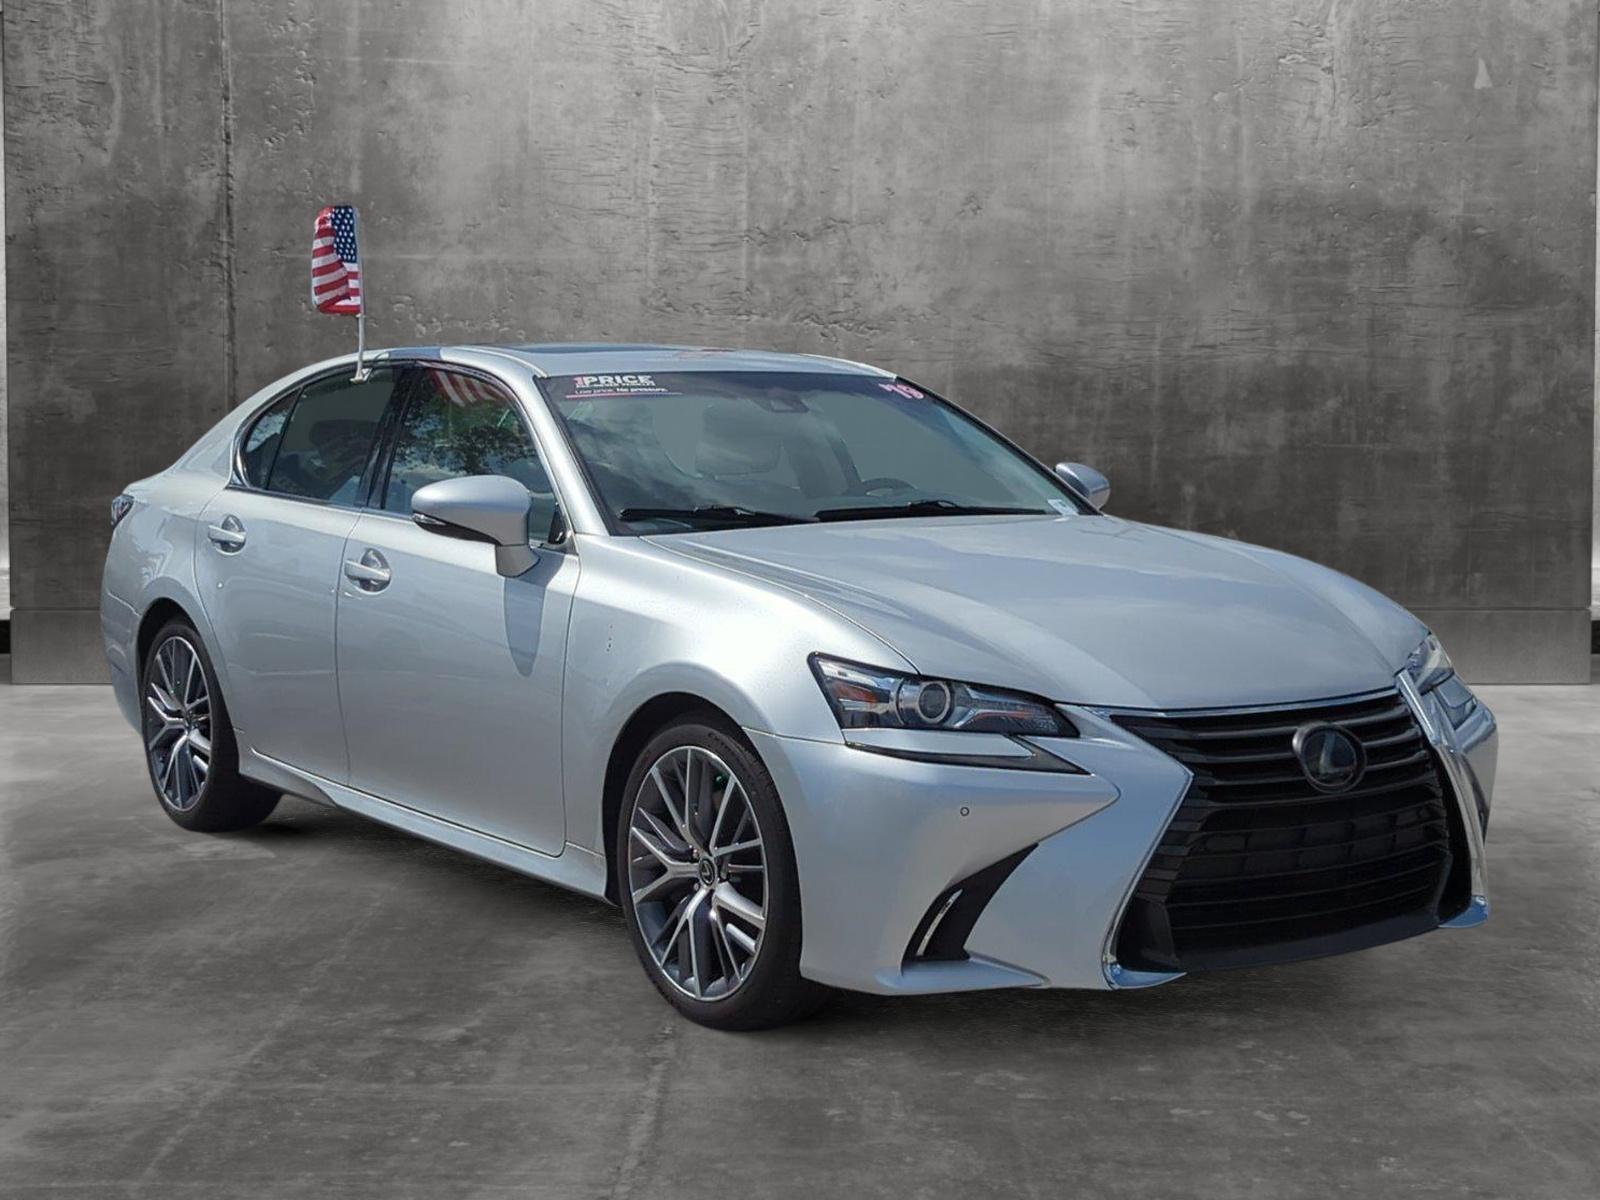 2019 Lexus GS 350 Vehicle Photo in Hollywood, FL 33021